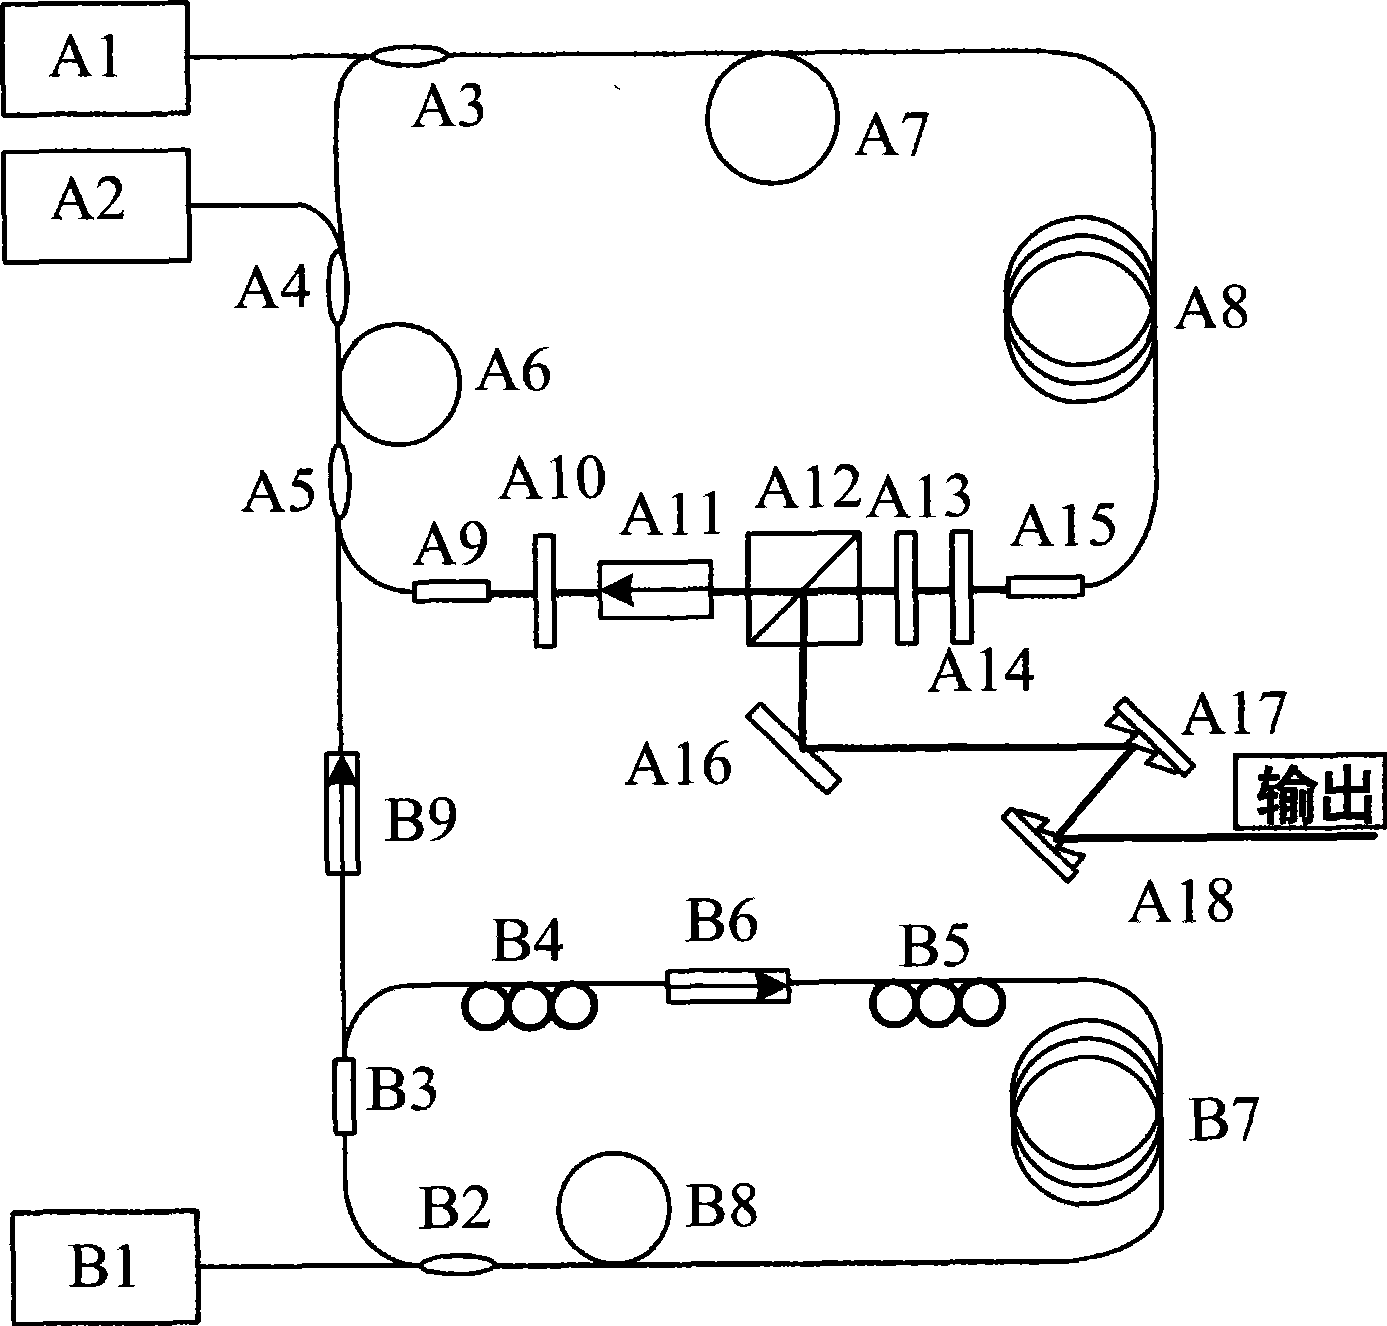 Process for generating low repeat frequency ultra-short laser pulse